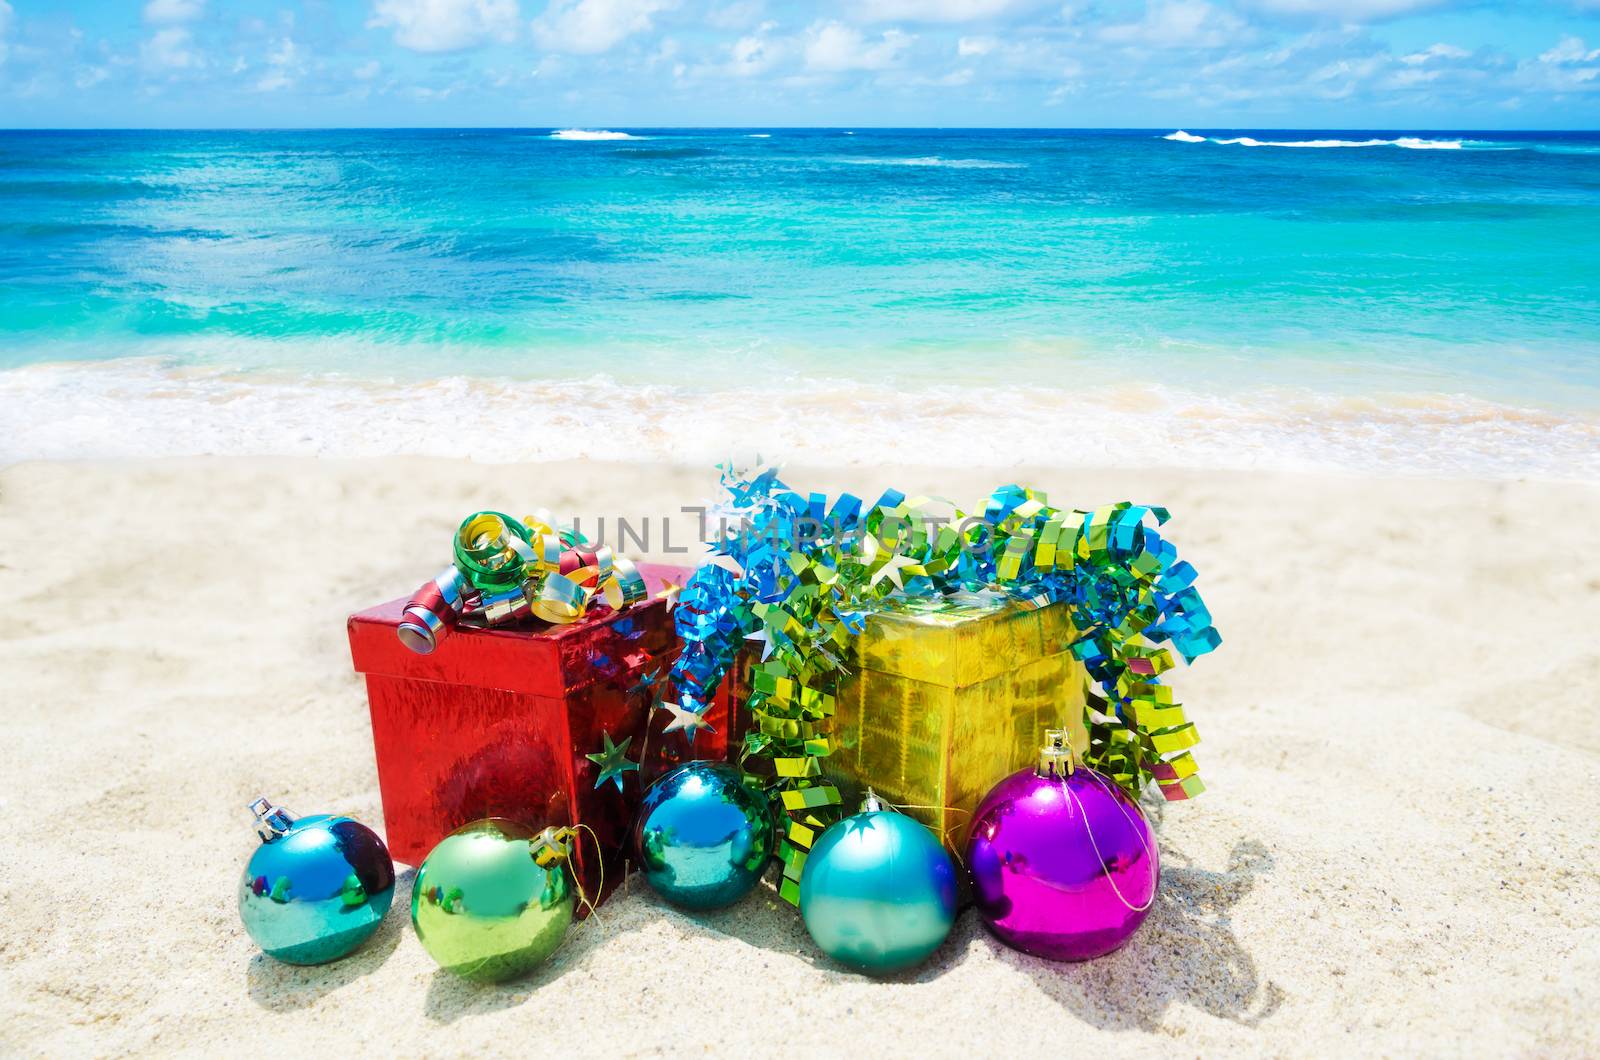 Two gift boxes with Christmas balls on the beach - holiday conce by EllenSmile